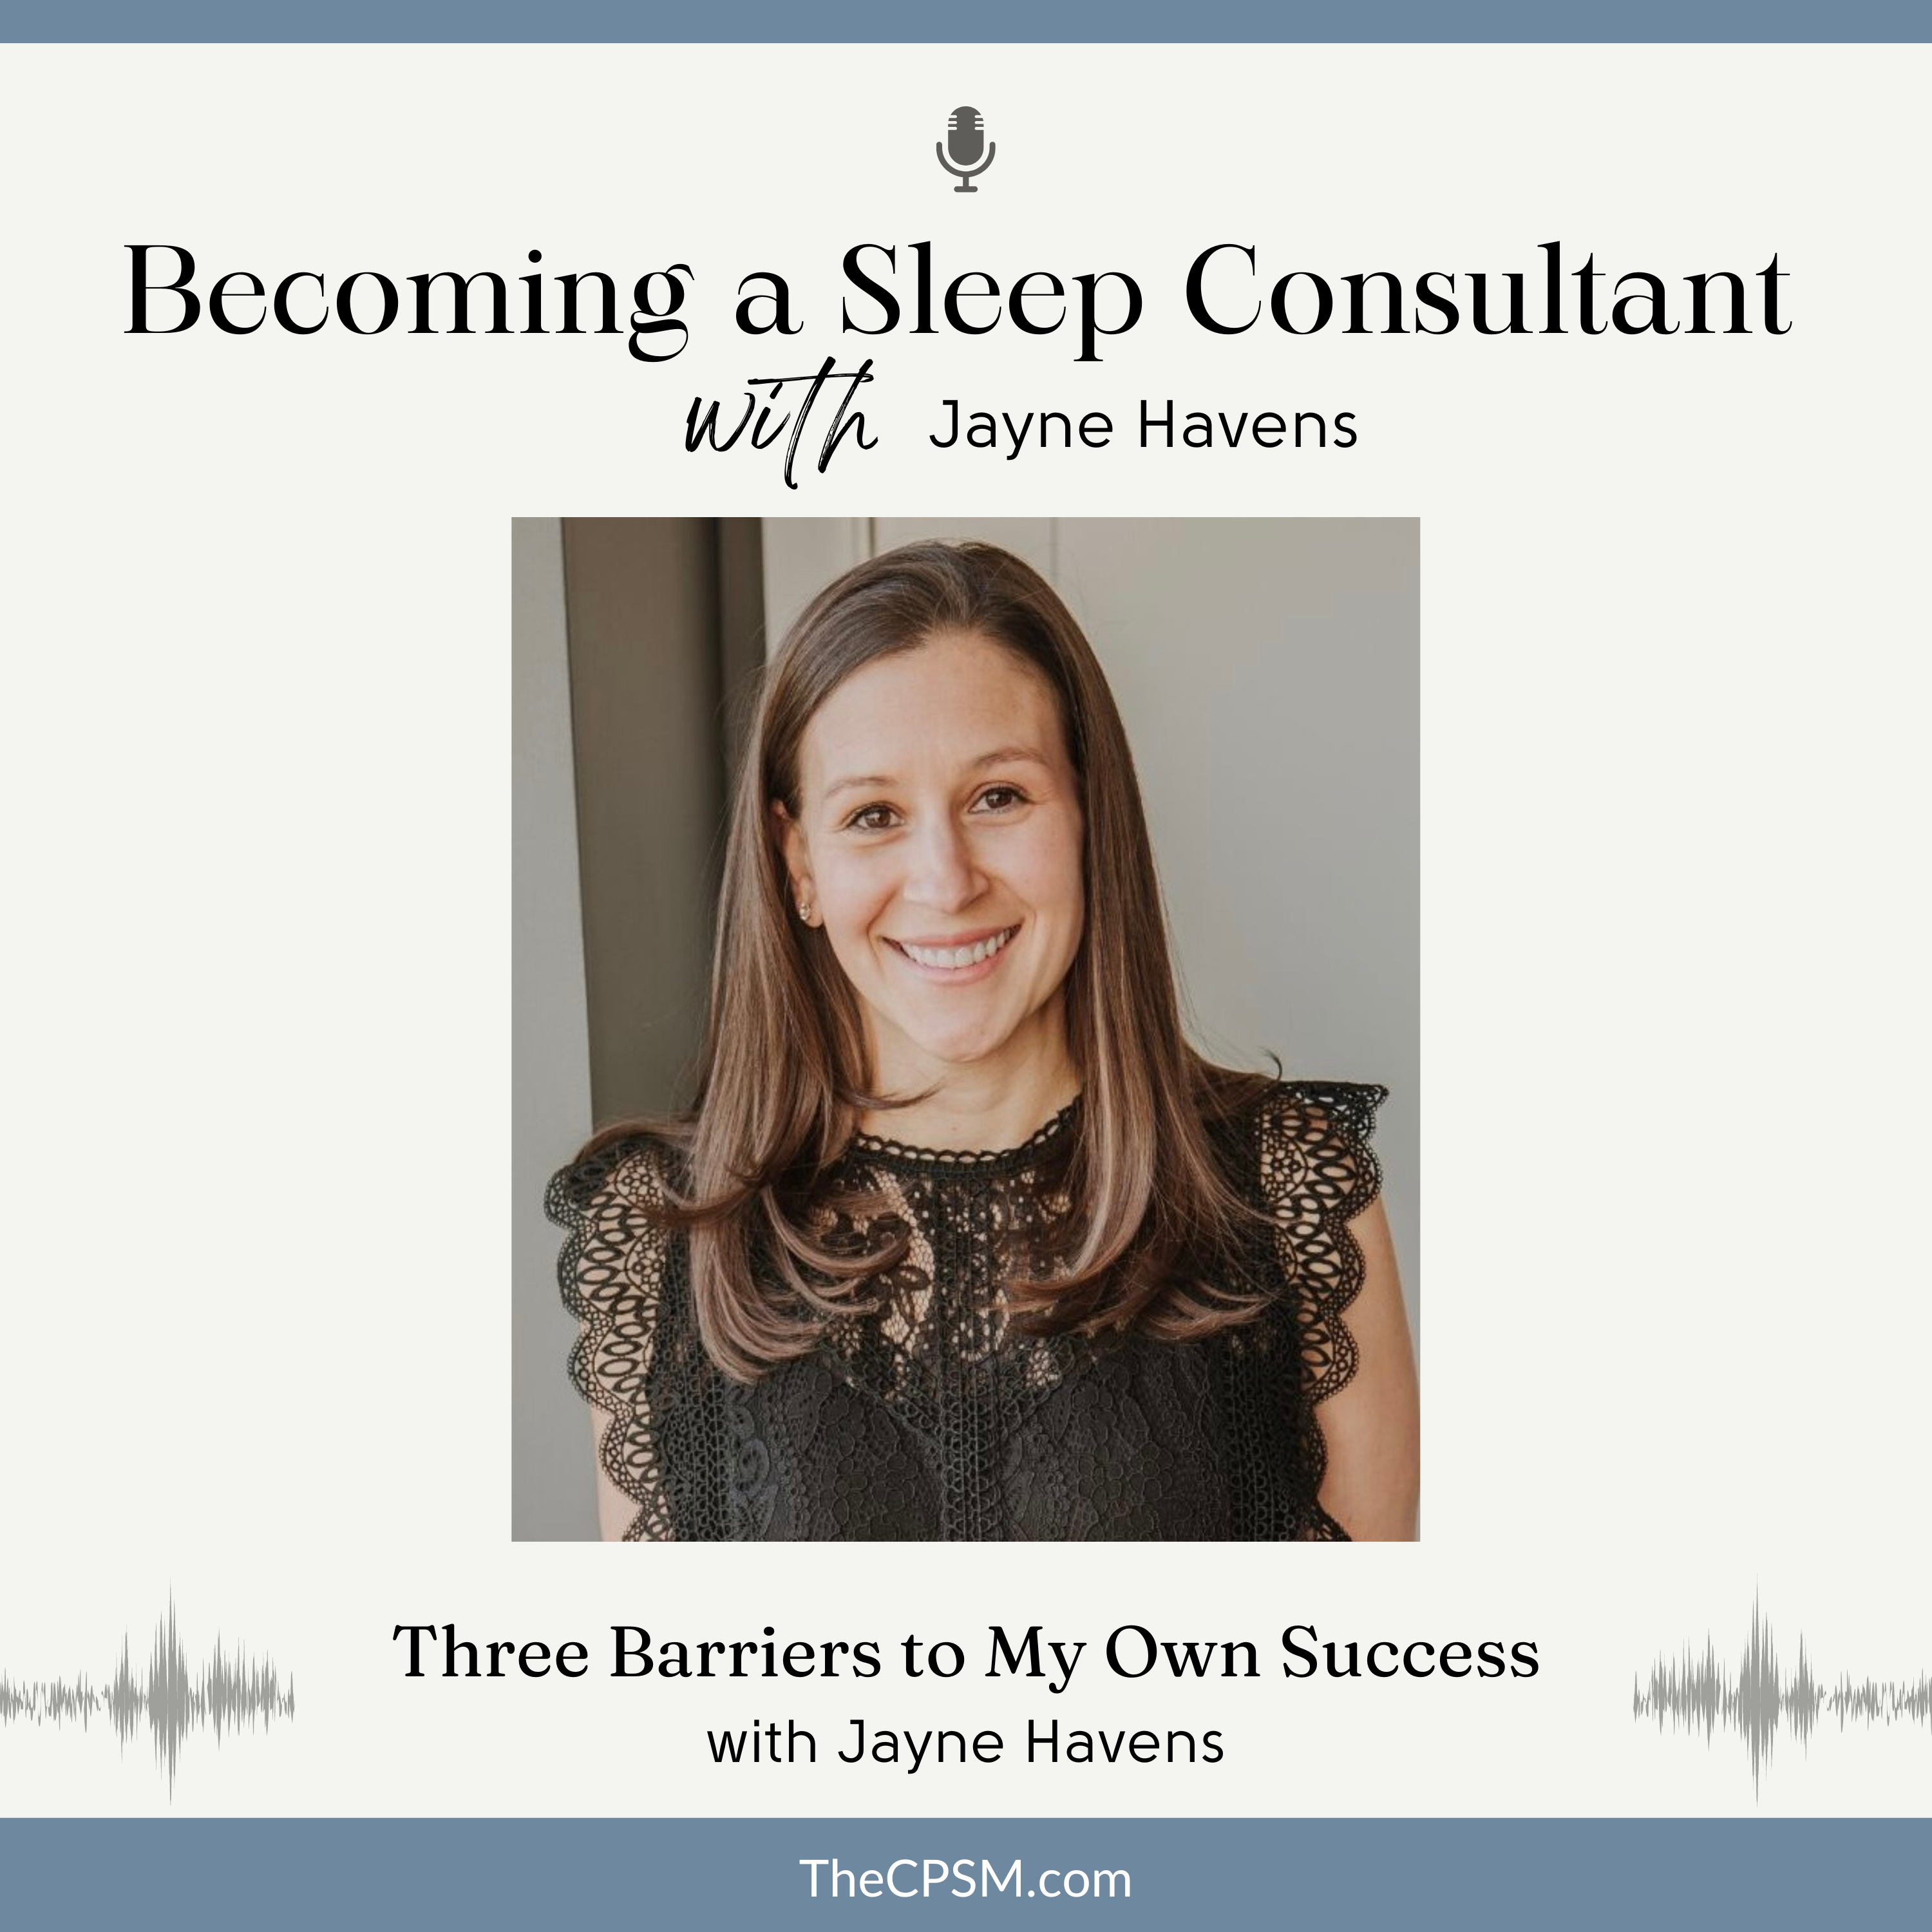 Three Barriers to My Own Success with Jayne Havens